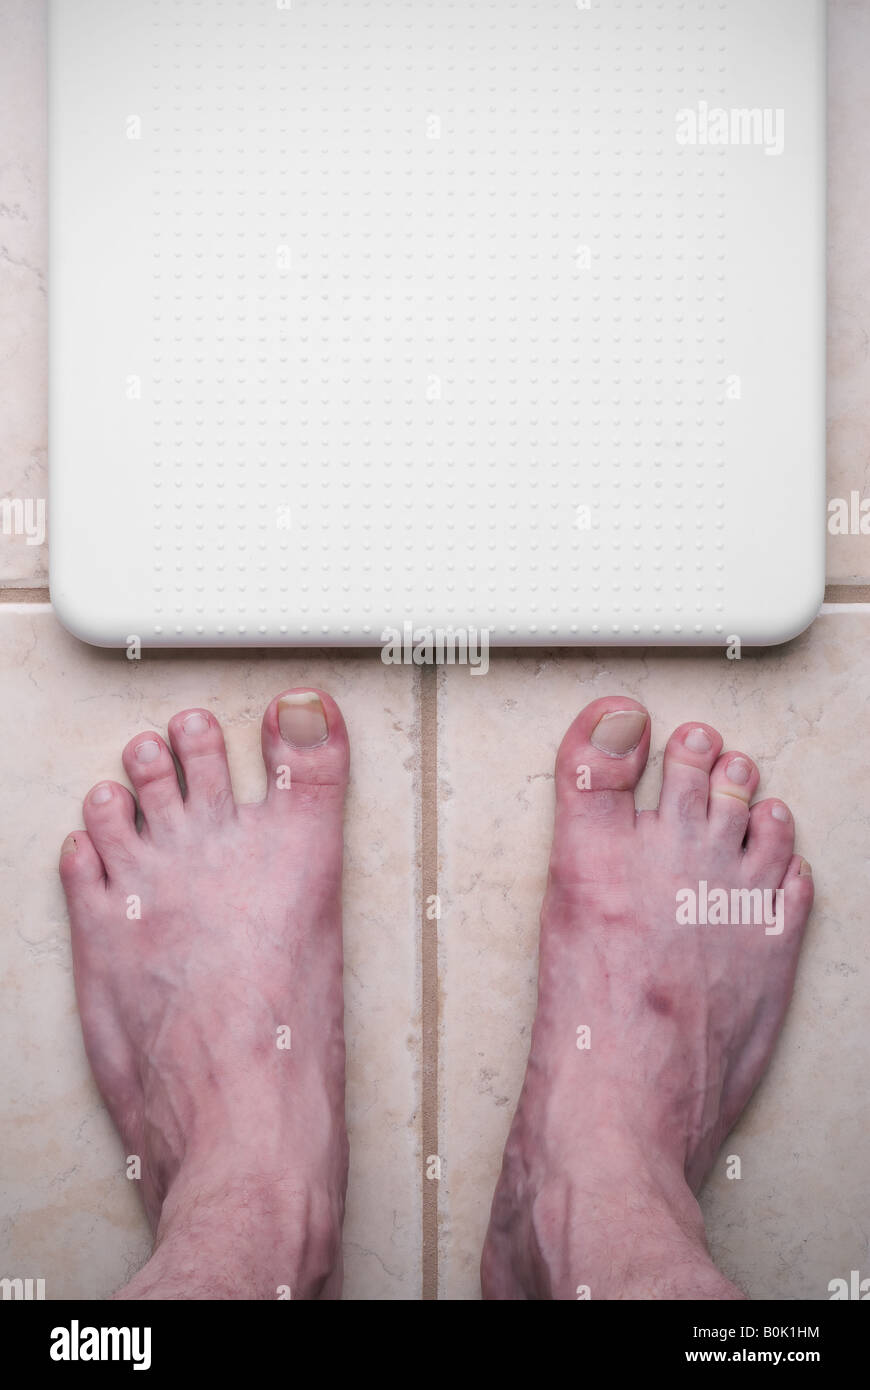 Ugly feet getting ready to step on a bathroom scale Stock Photo